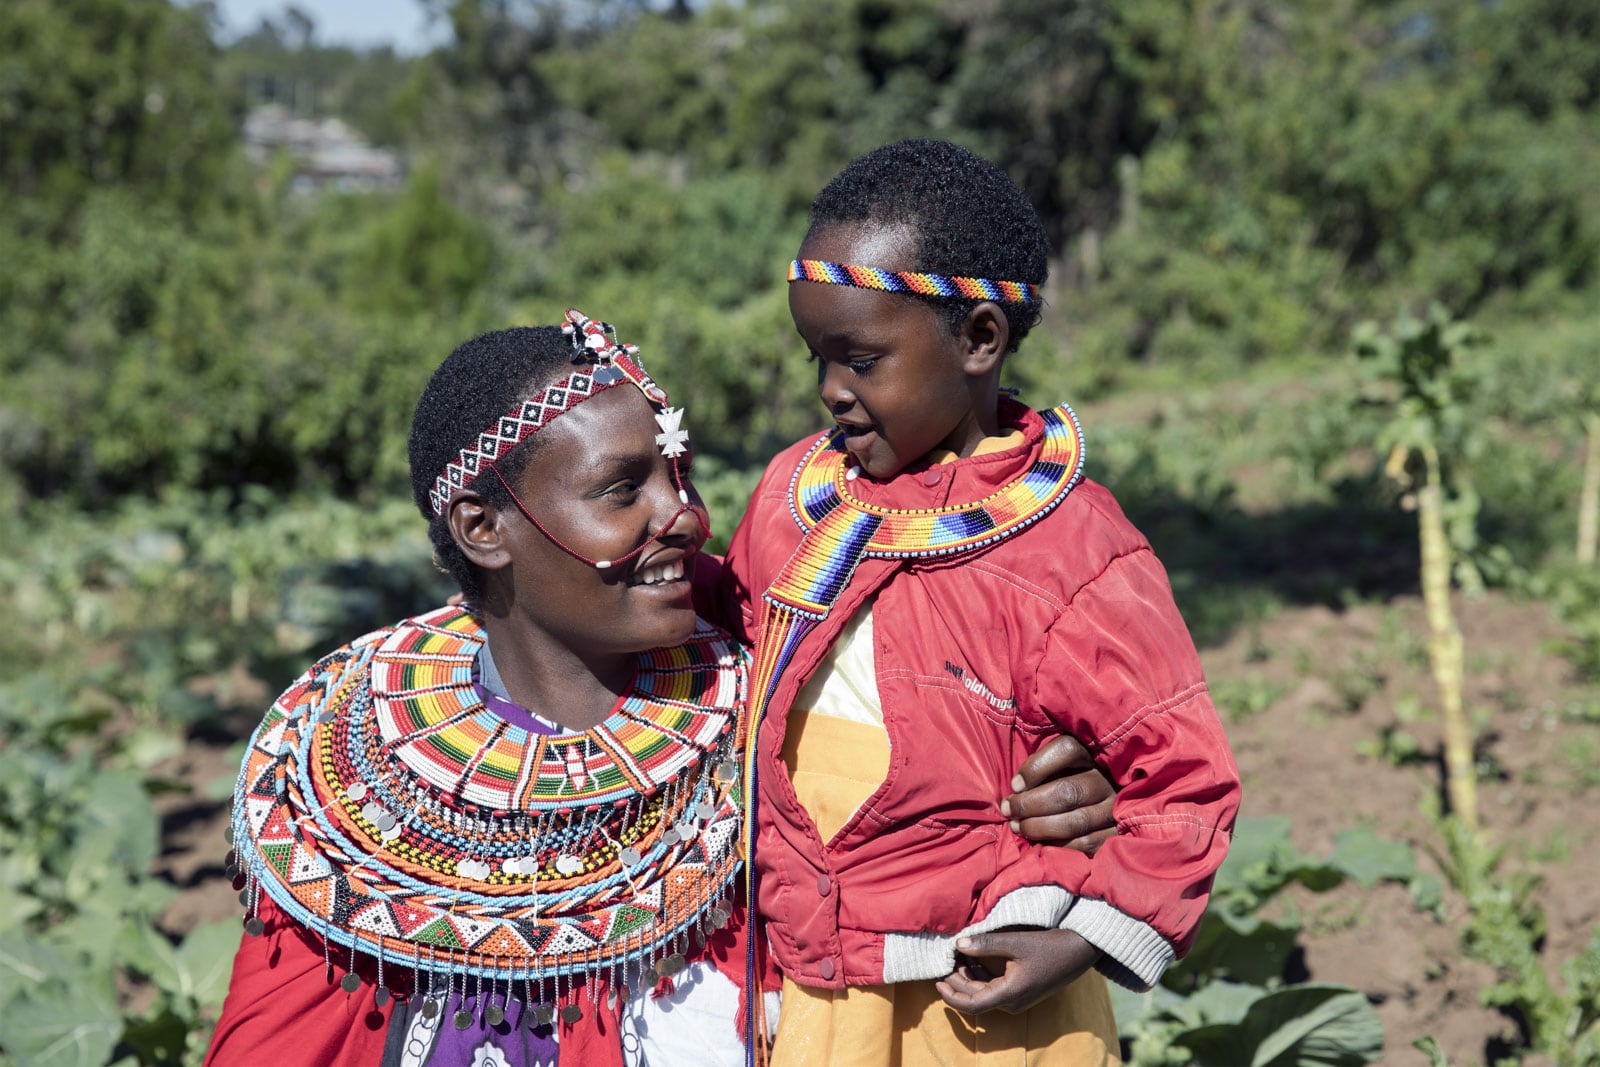 Mother and child hugging while wearing traditional Kenyan clothing.